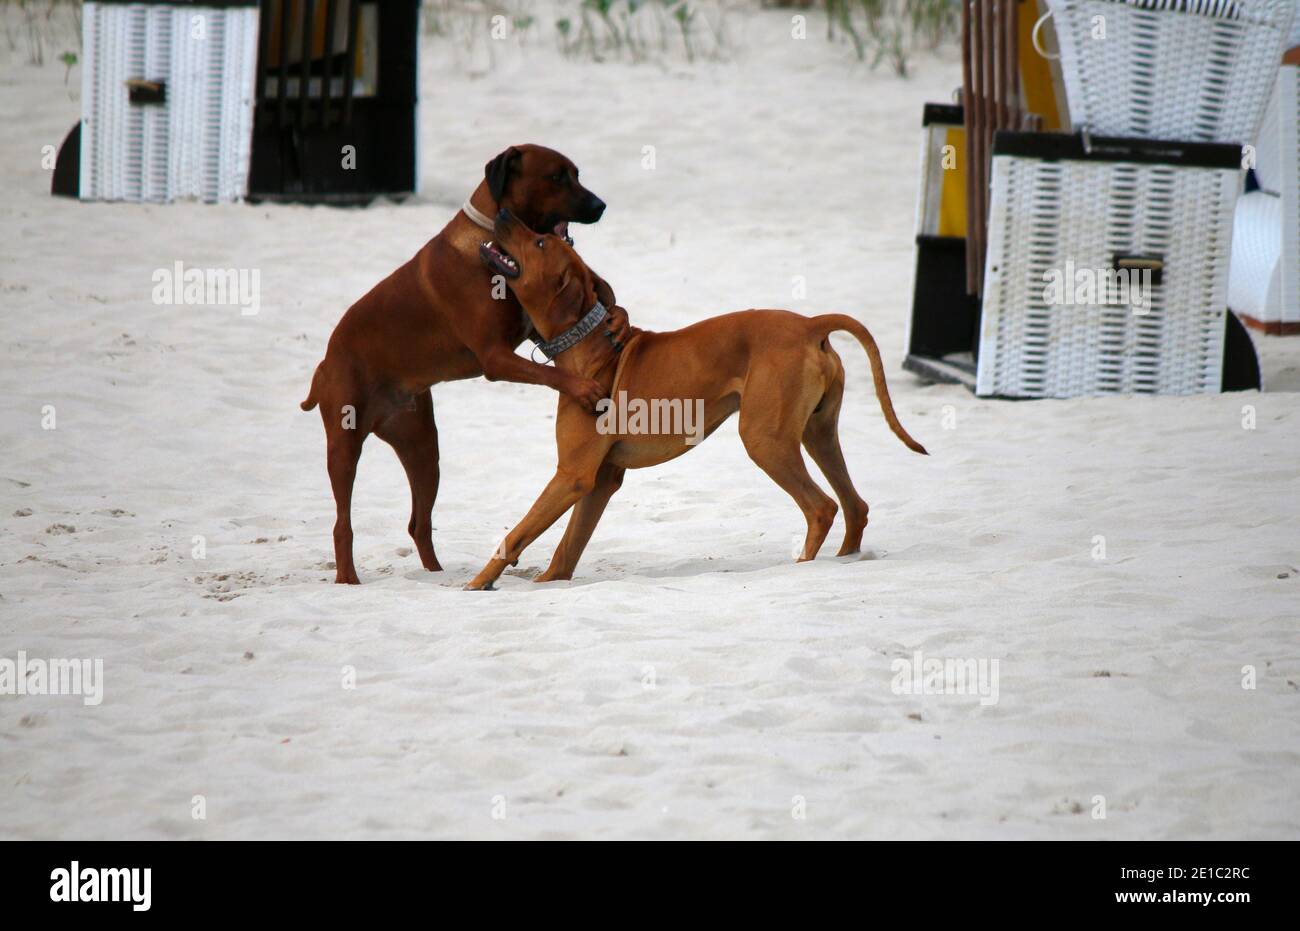 Hunde Strand High Resolution Stock Photography and Images - Alamy